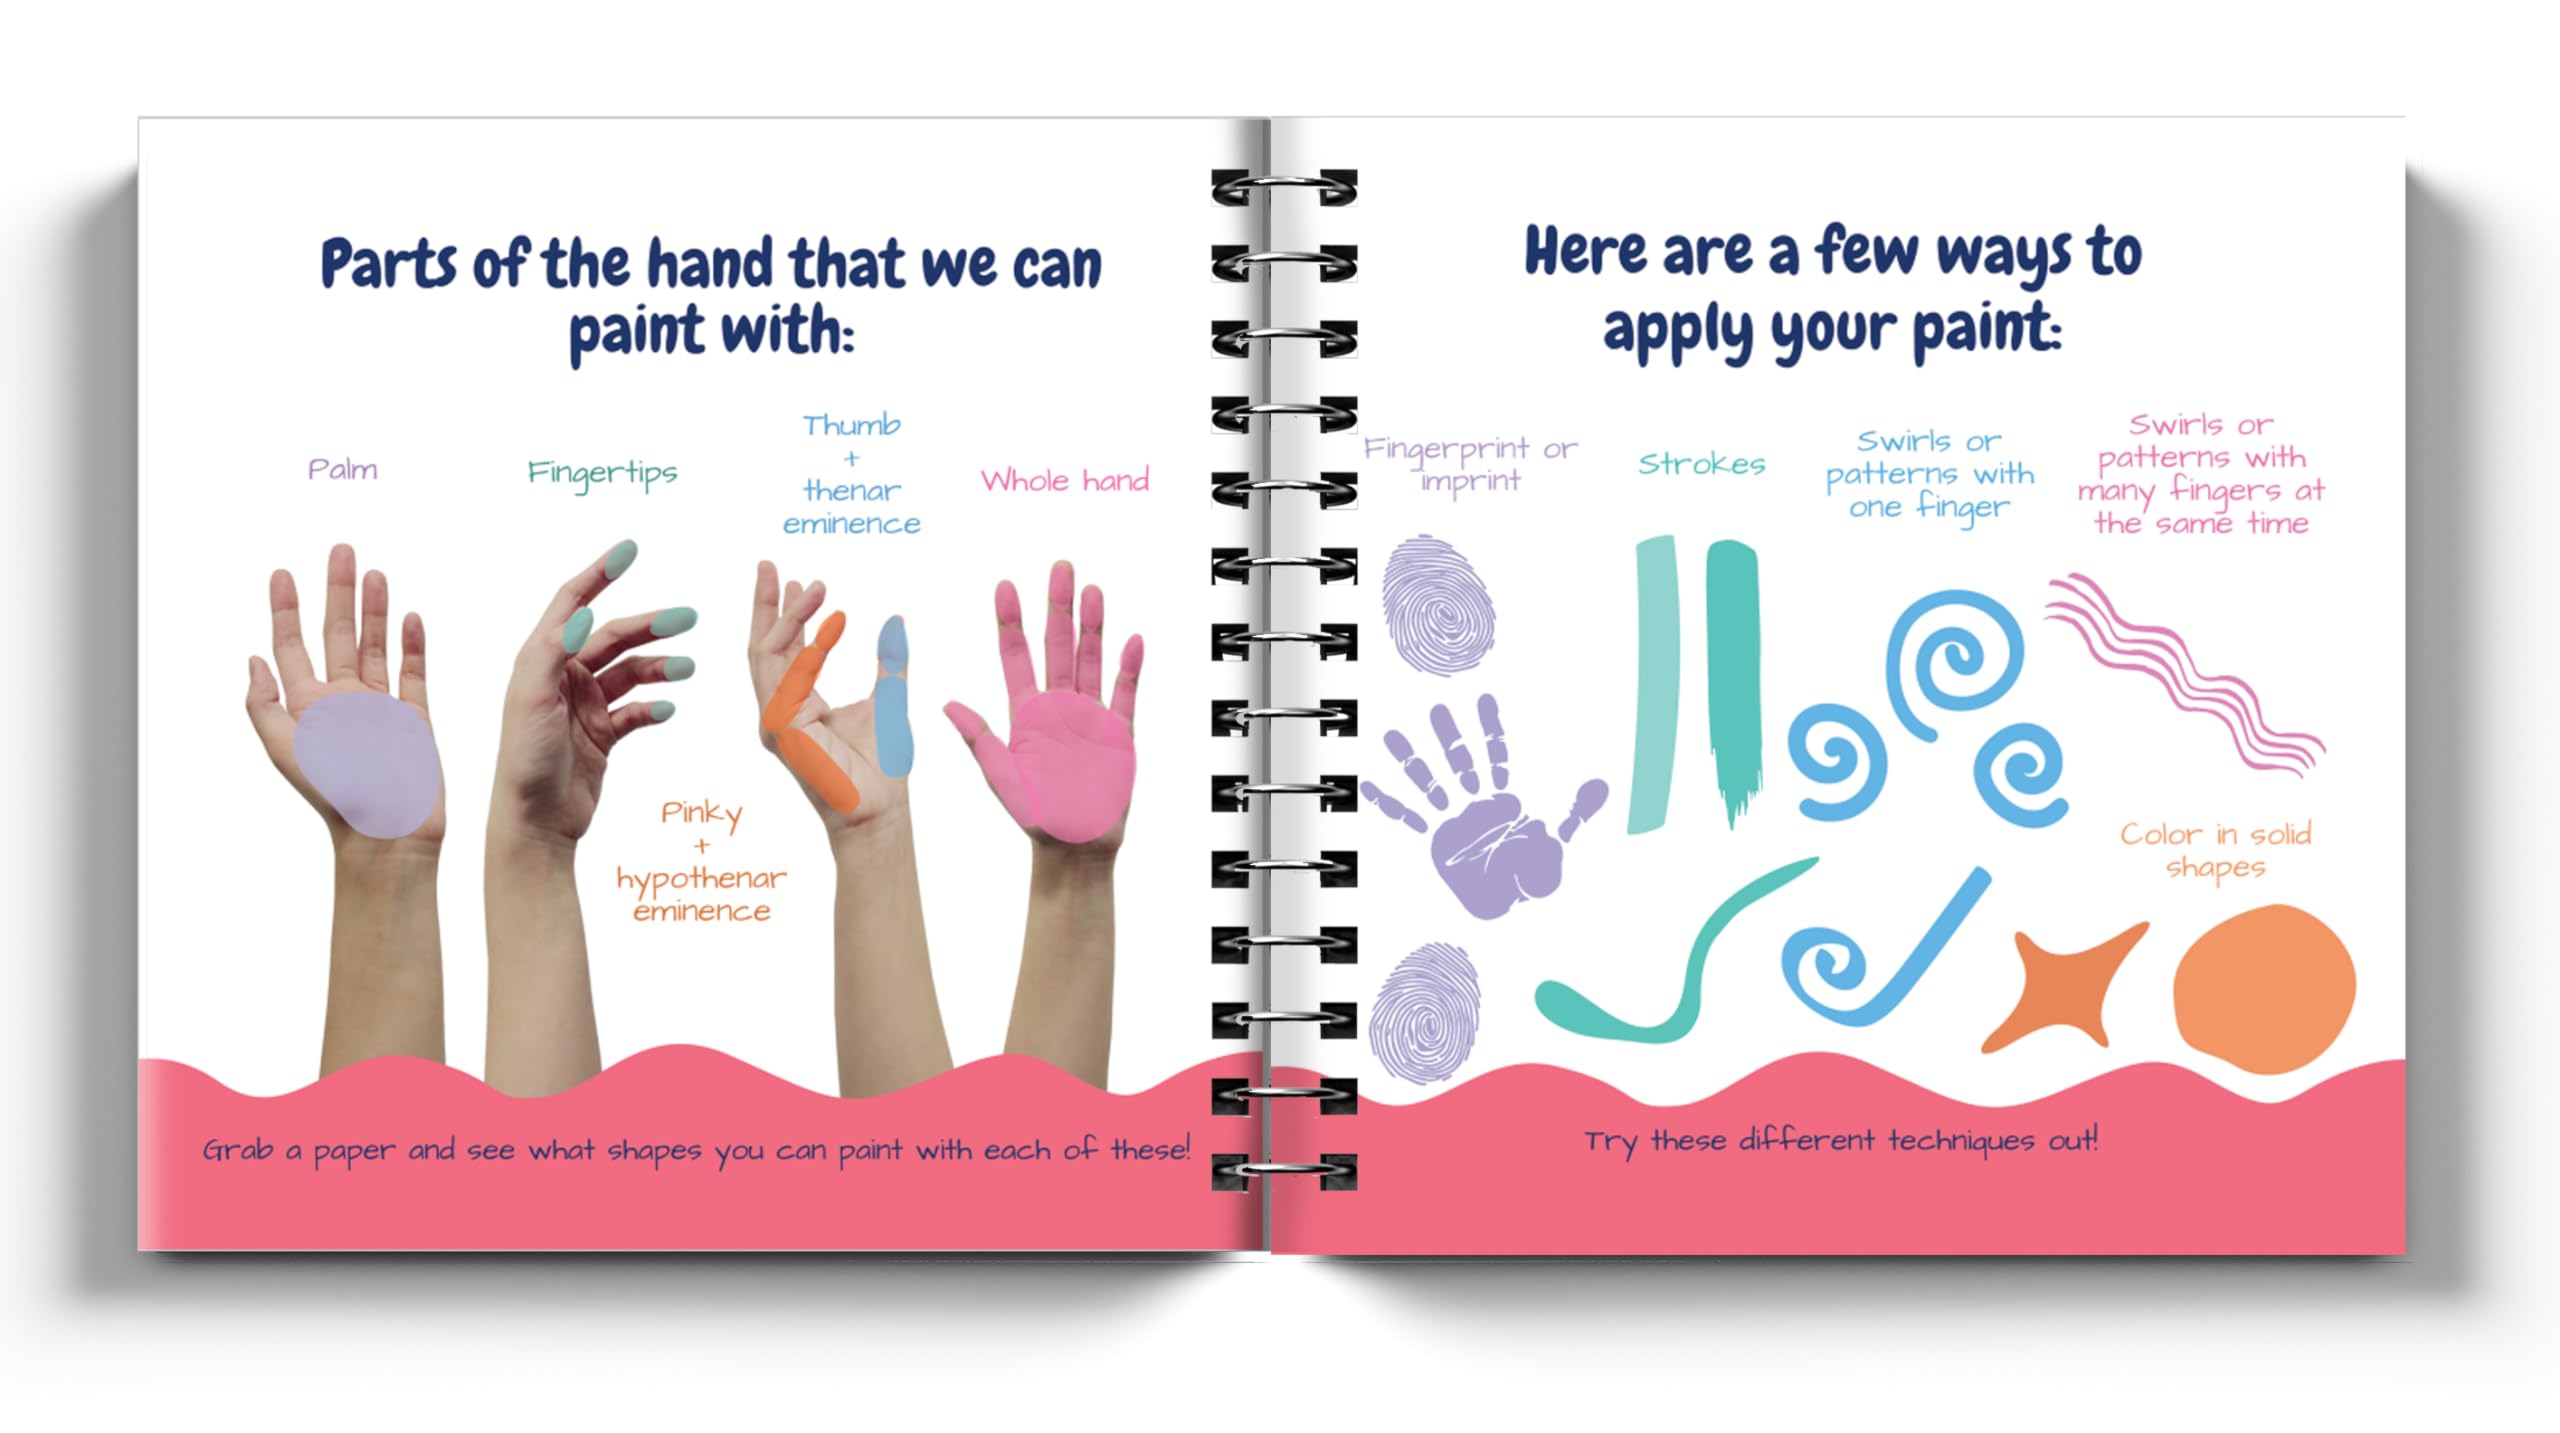 Let's Have Fun with Finger Painting: Creating with Little Hands. Children's art activity book for ages 3-7.